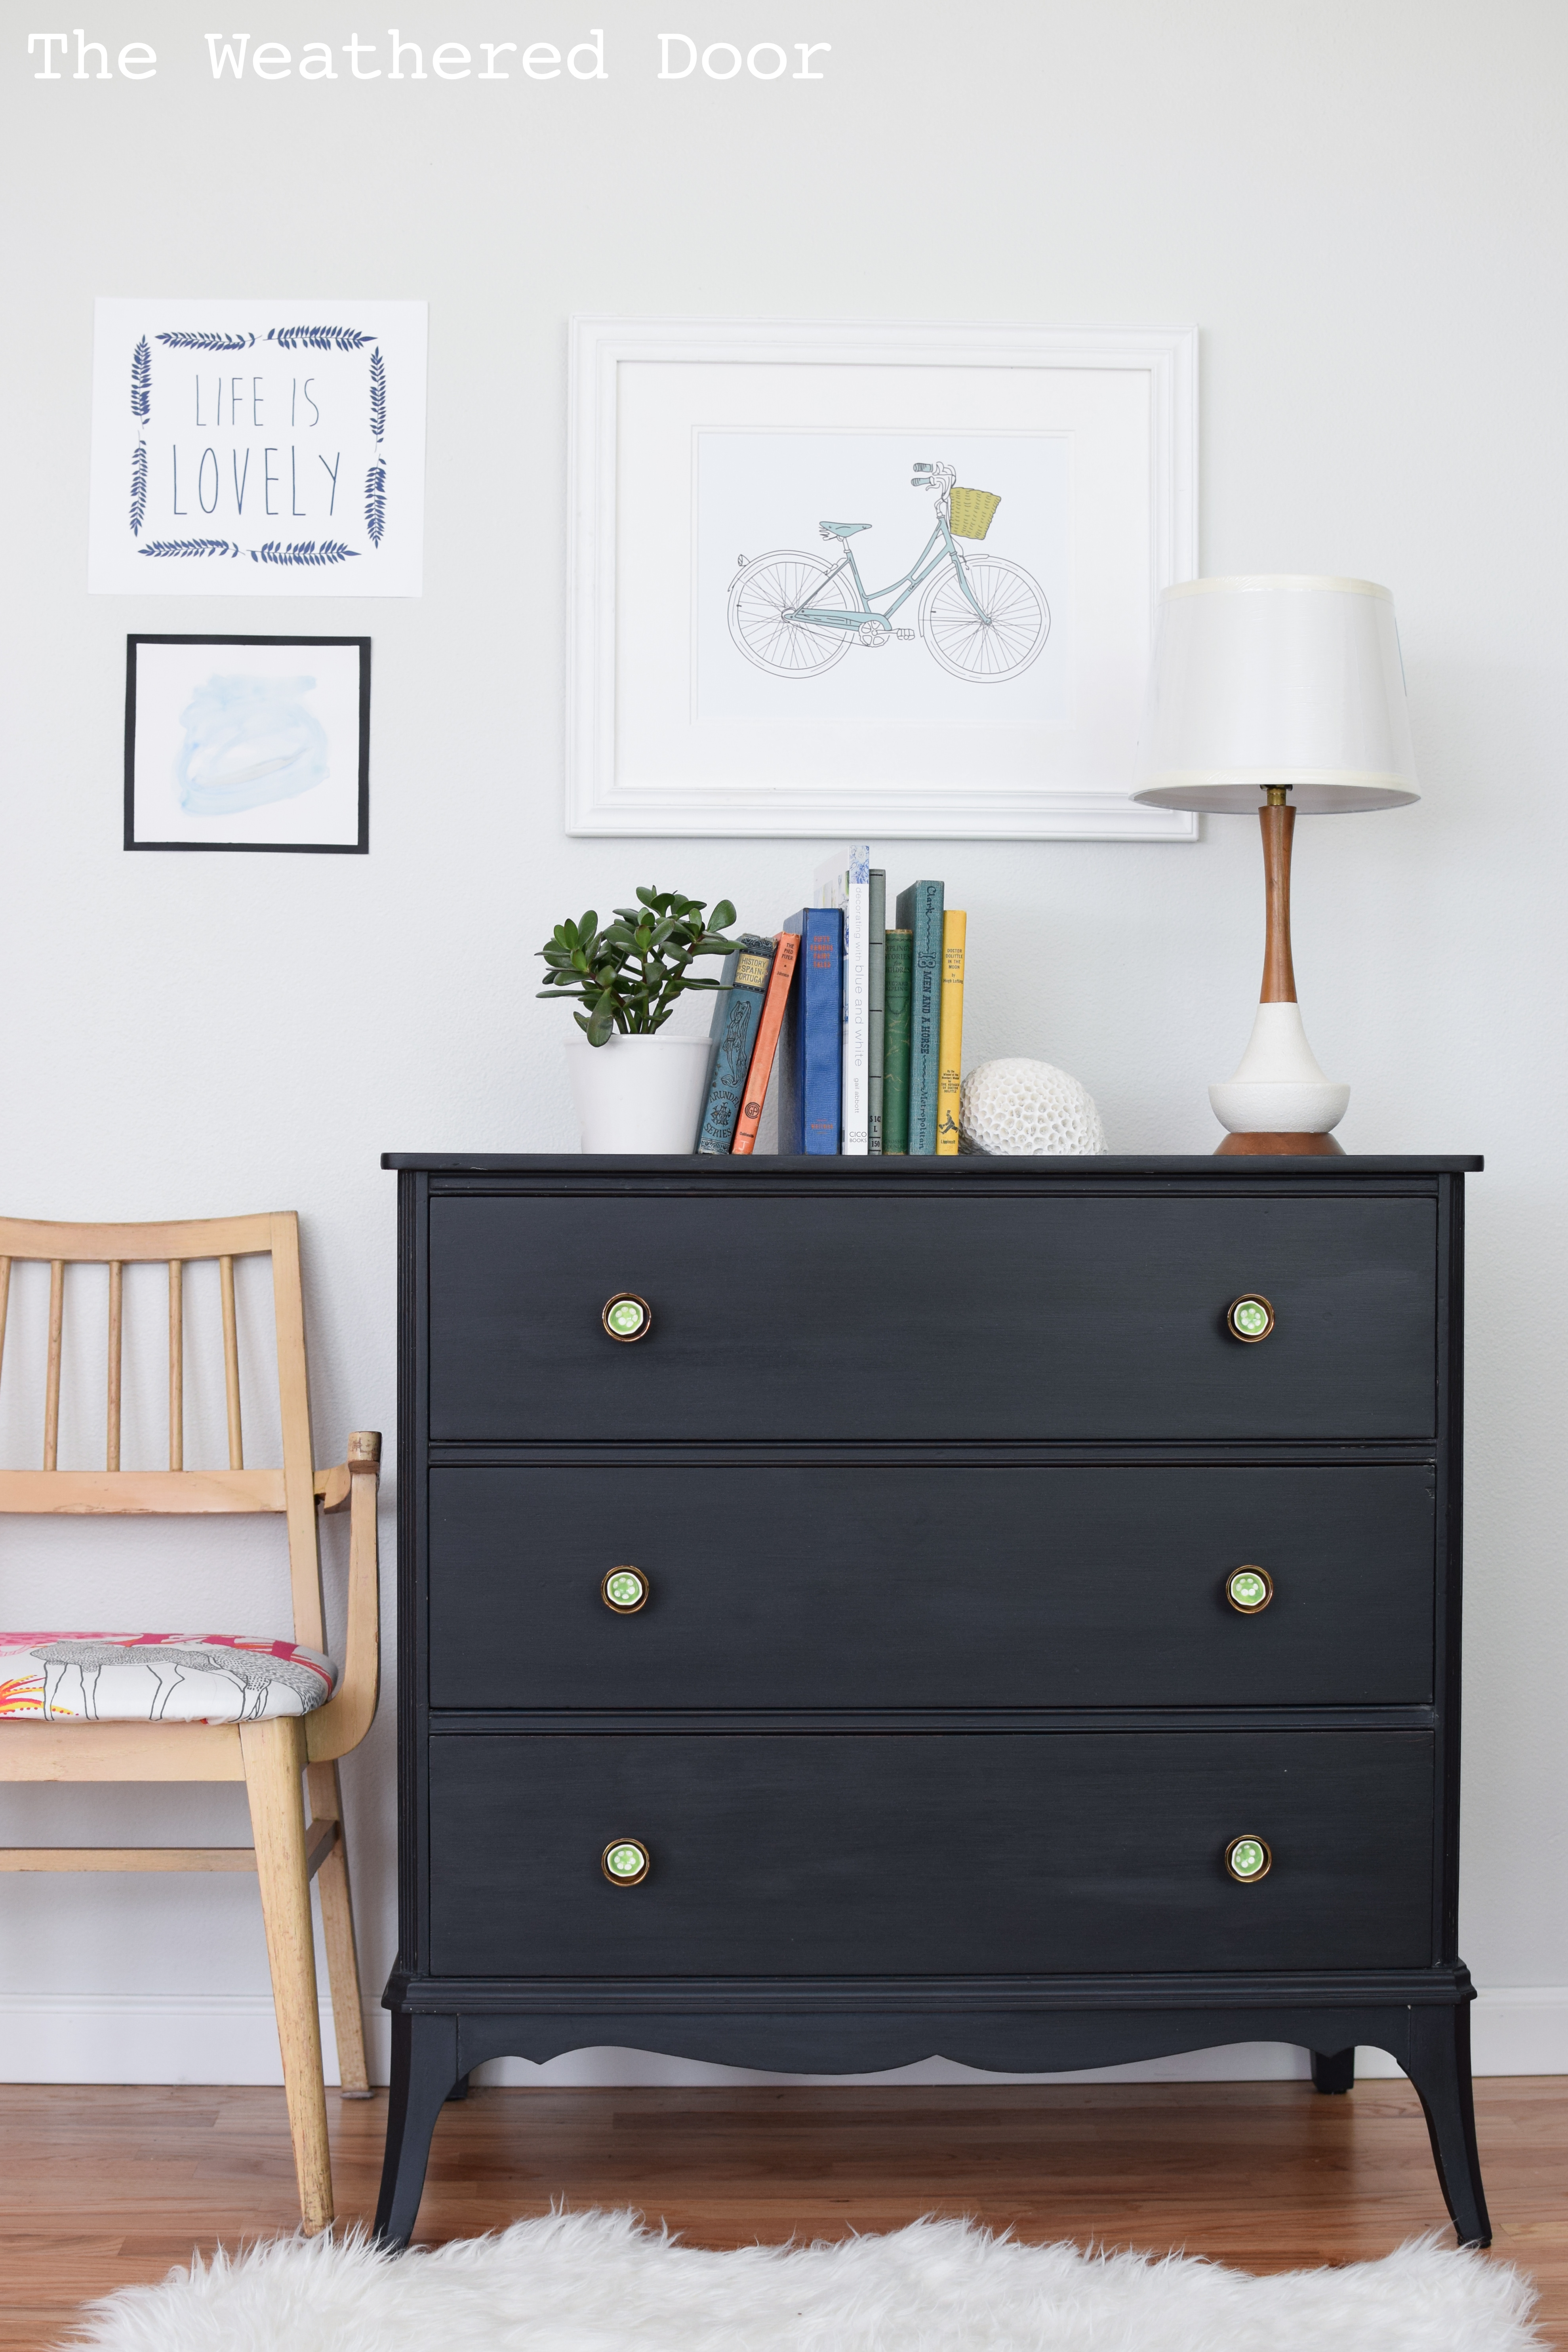 3 Drawer Hepplewhite Black Milk Paint Dresser Before & After | from The Weathered Door